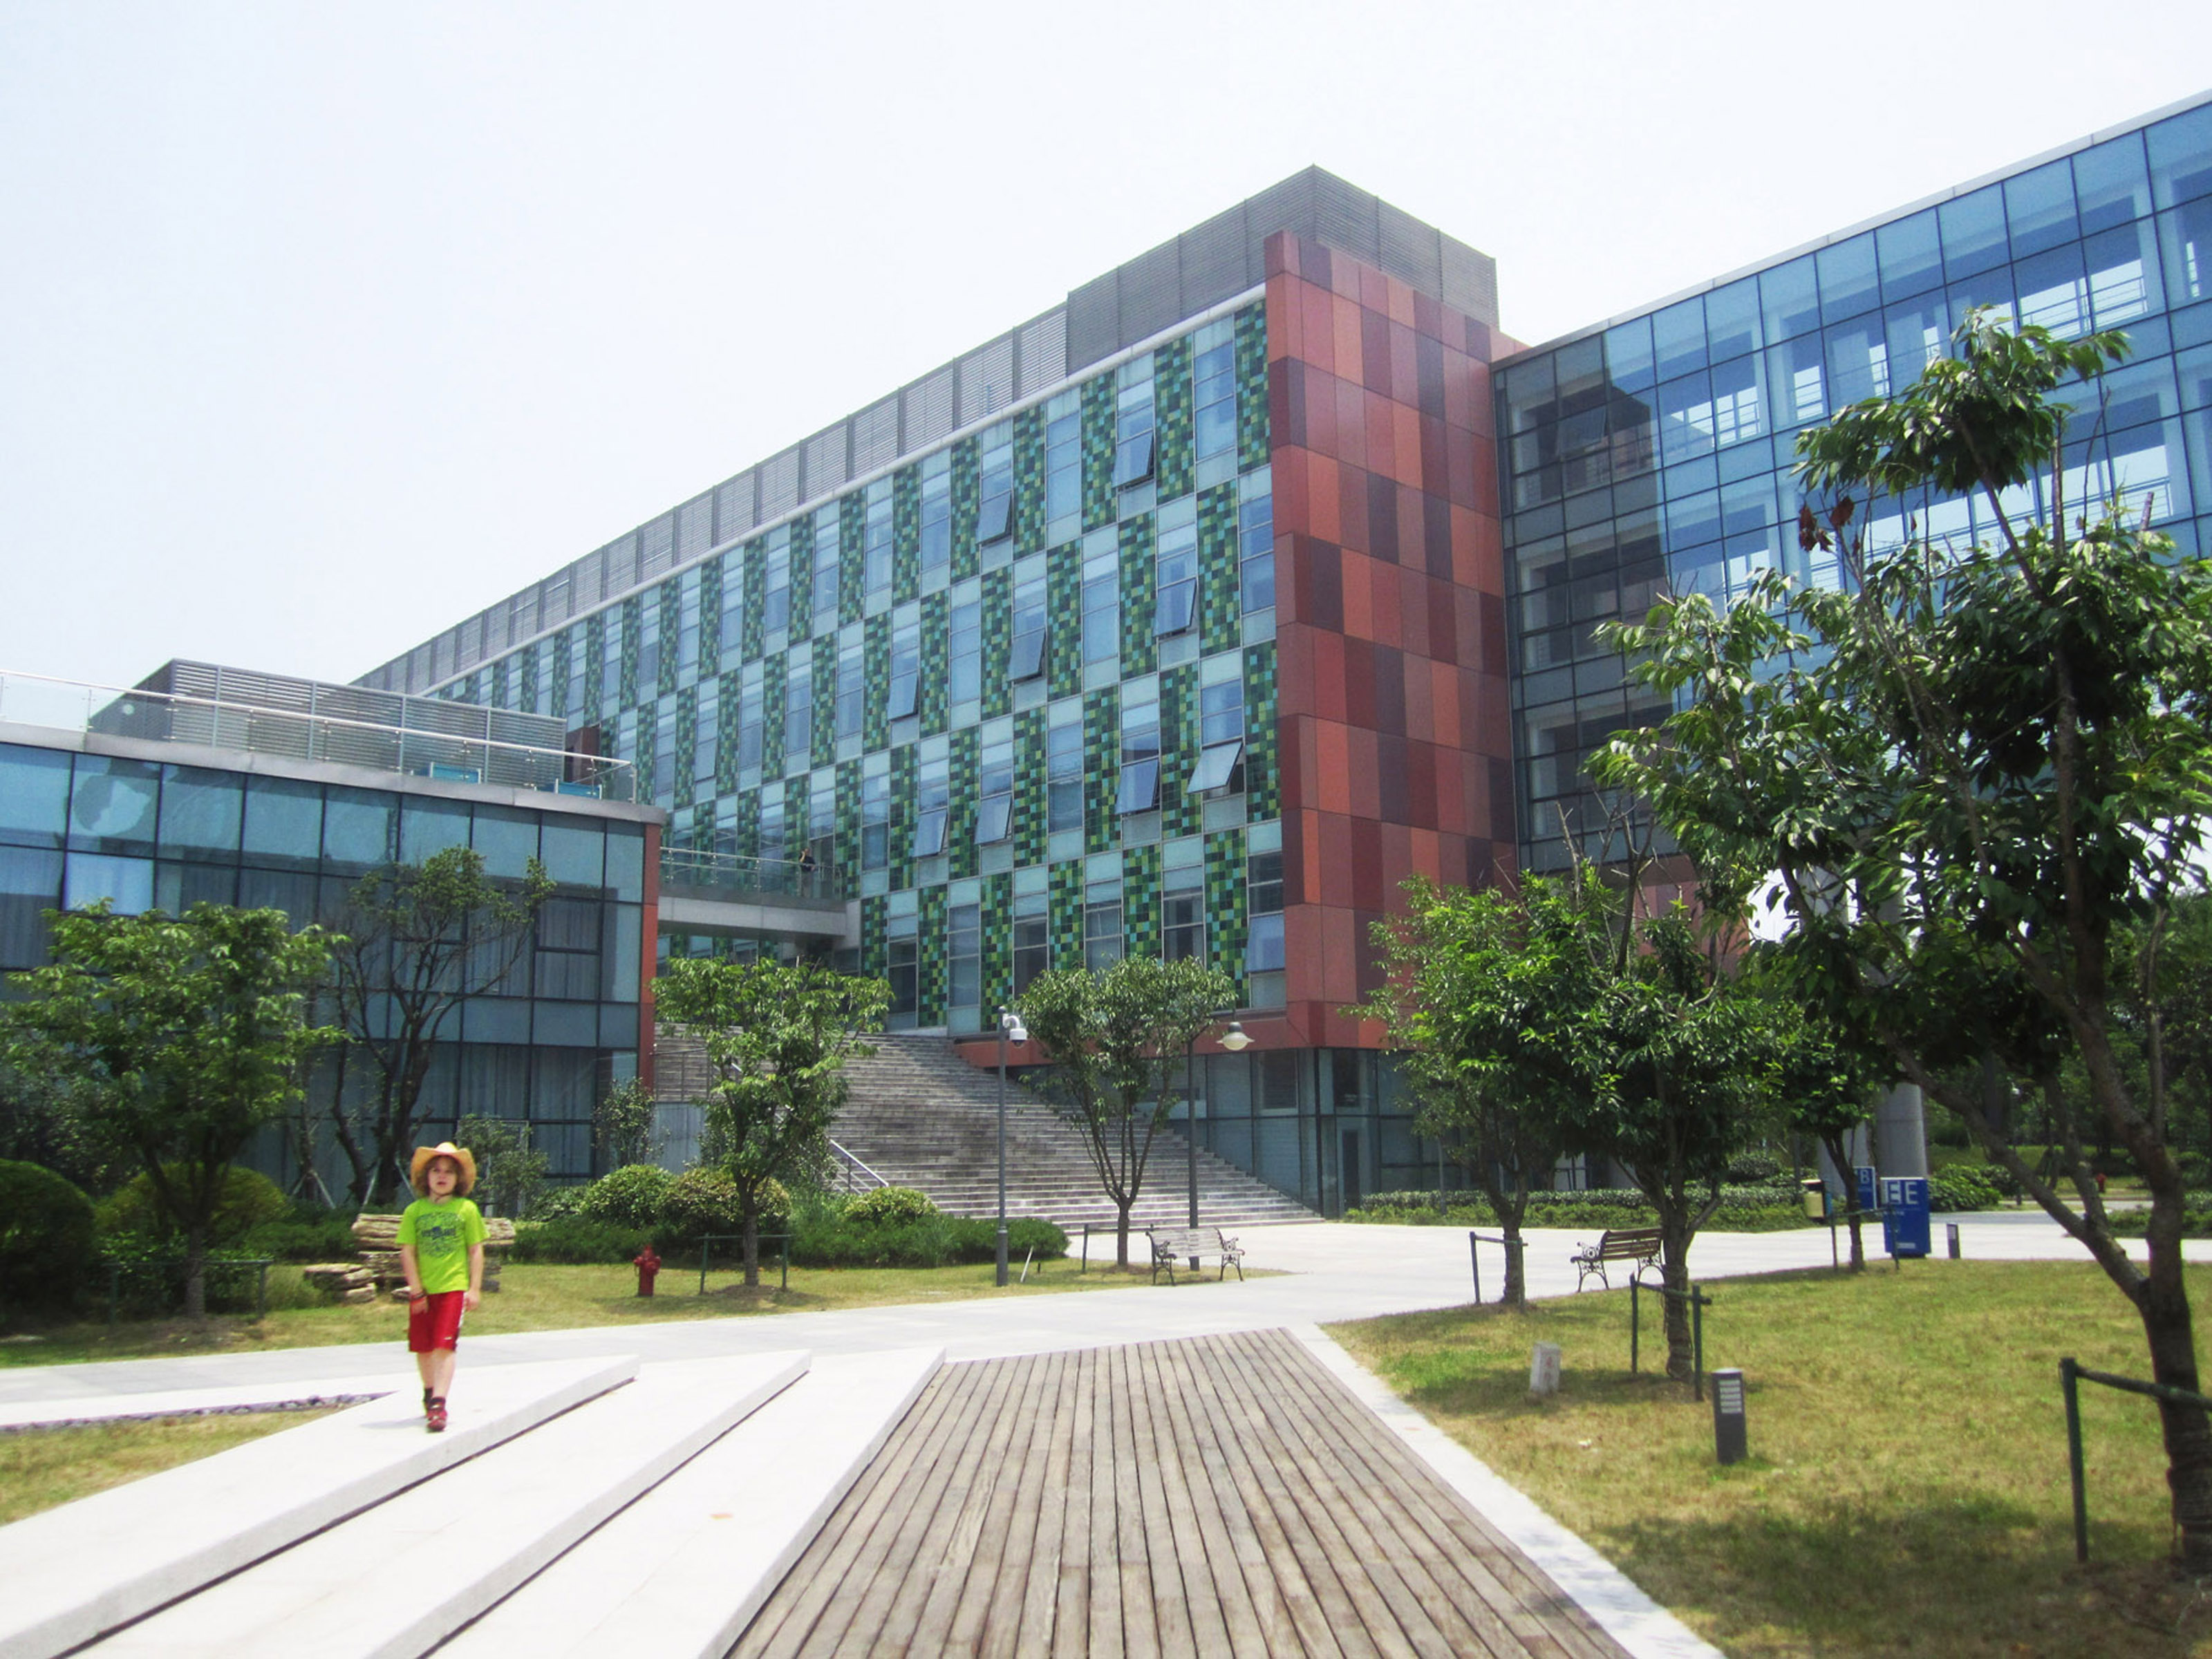 Photo by Bill Sewell. <p> The campus of XJTLU in Suzhou, including seven-year-old Ben.